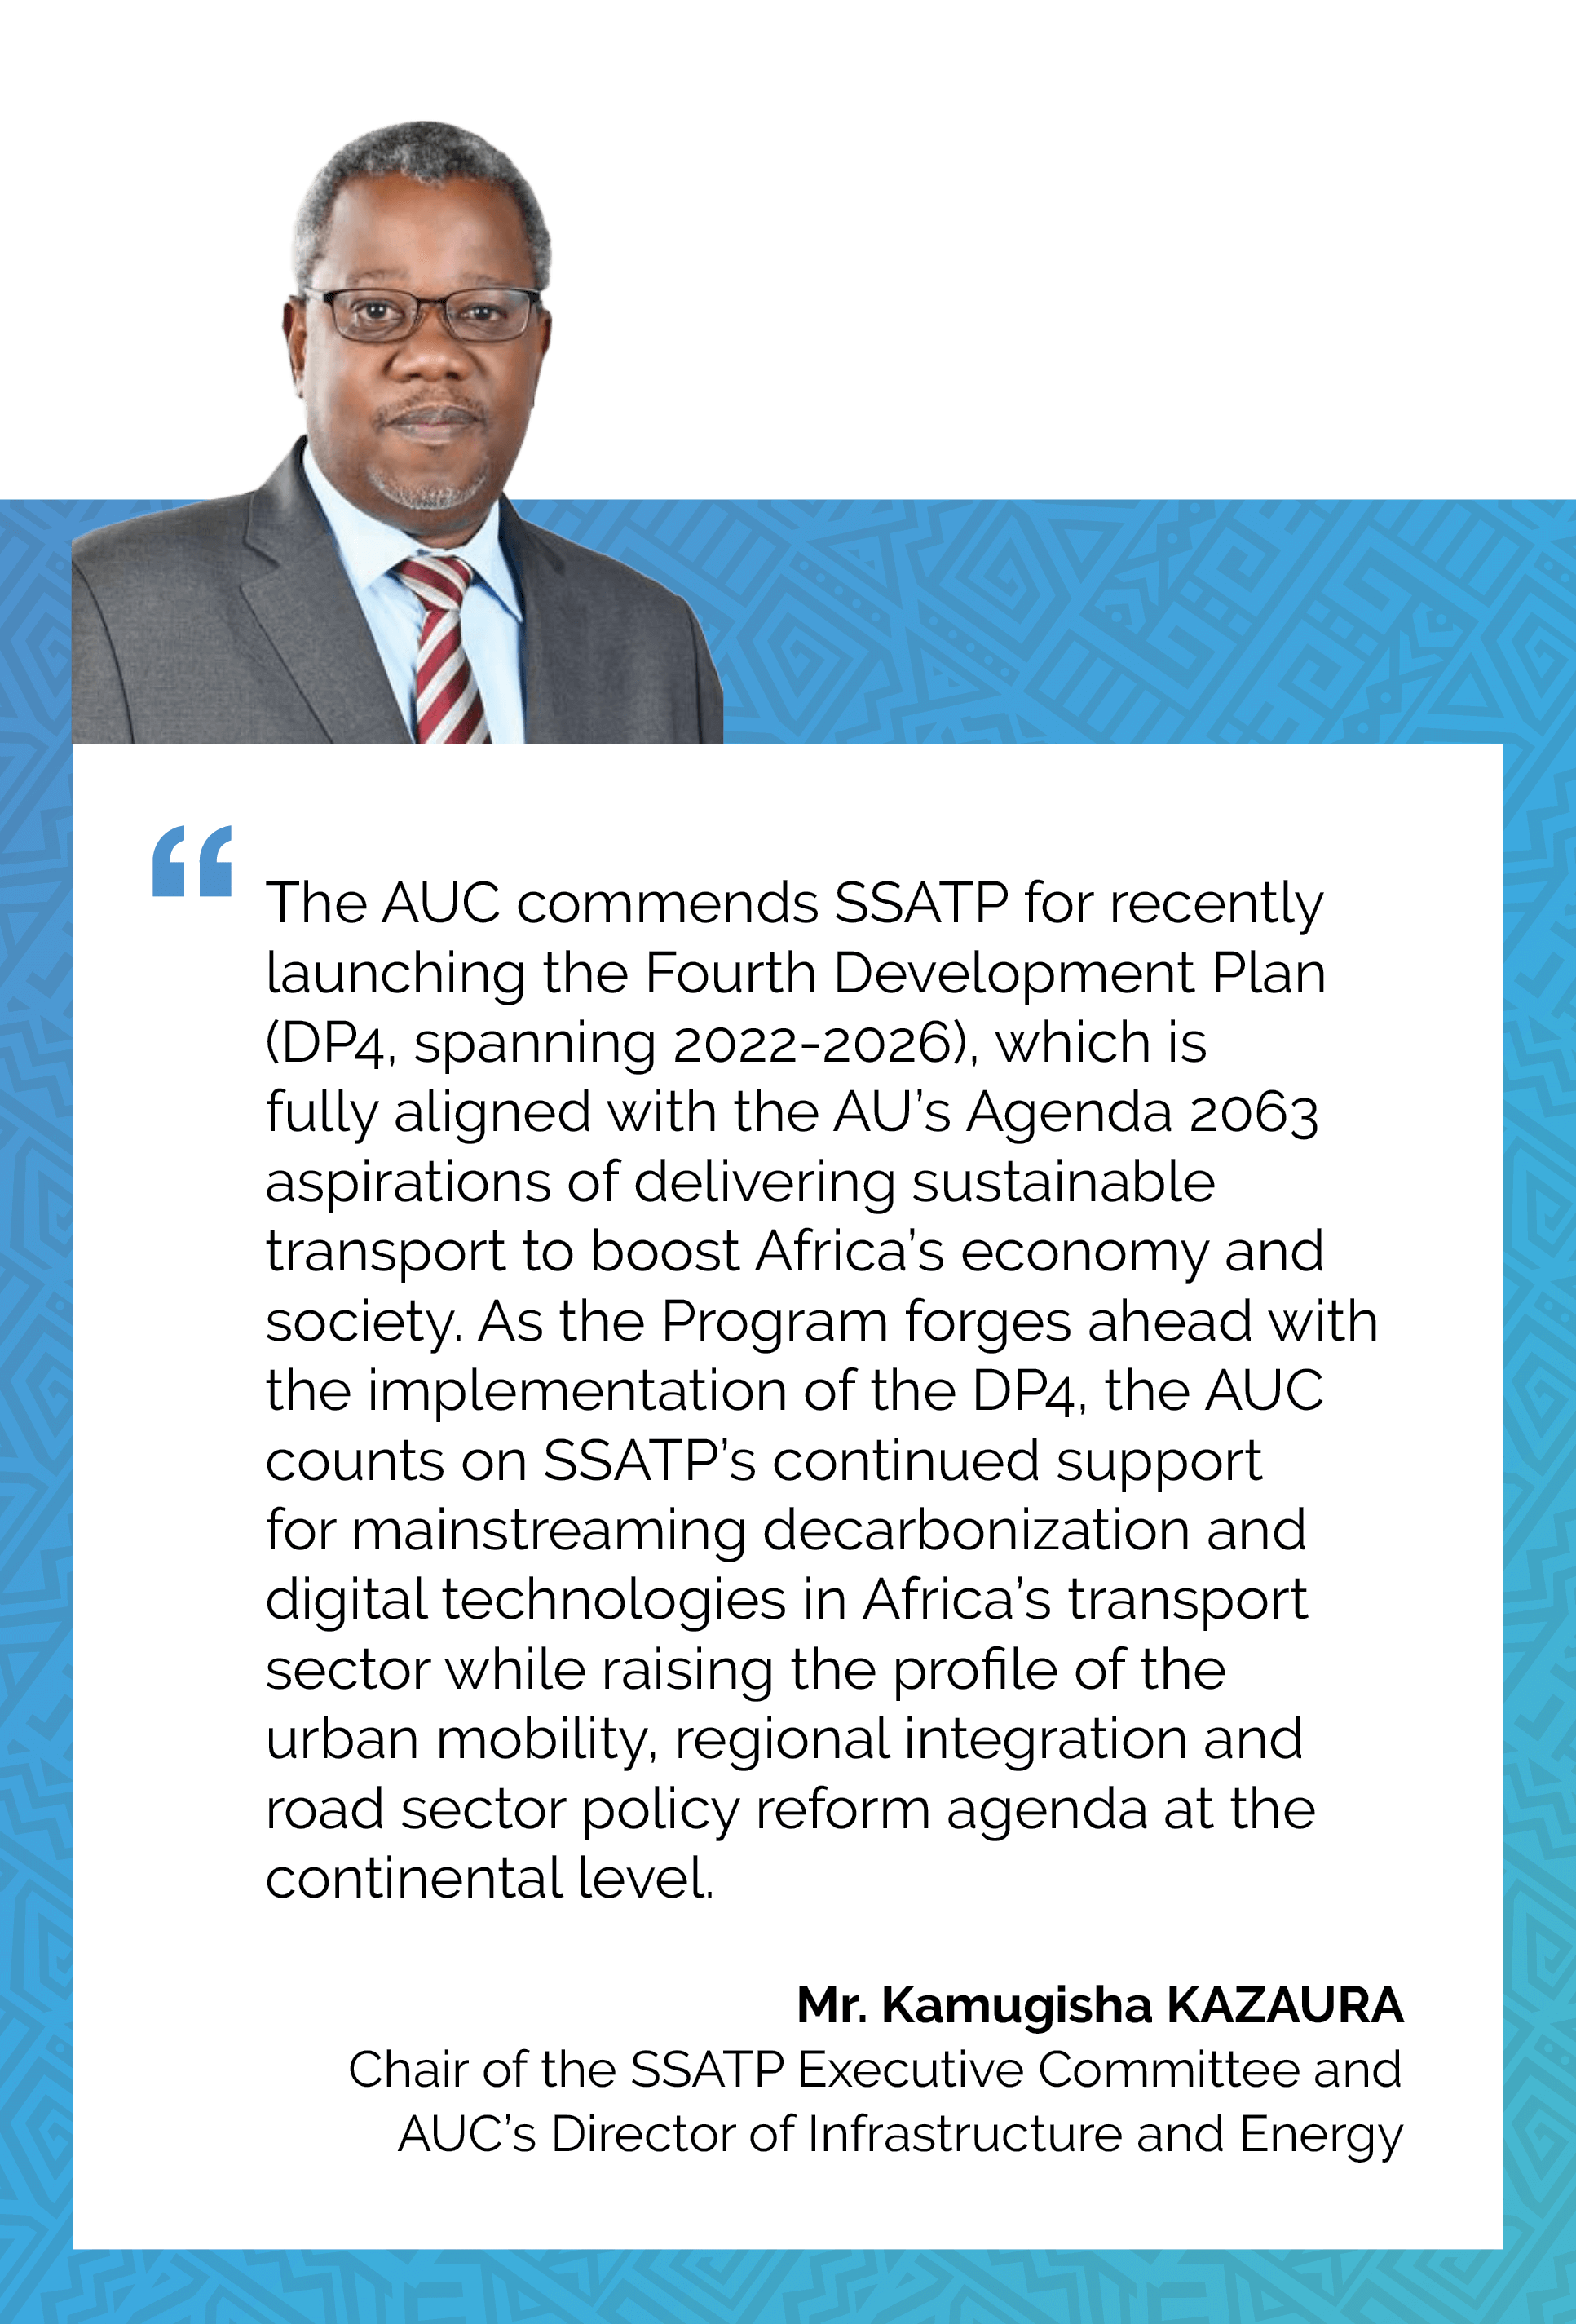 Mr. Kamugisha KAZAURA  Chair of the SSATP Executive Committee and AUC Director of Infrastructure and Energy